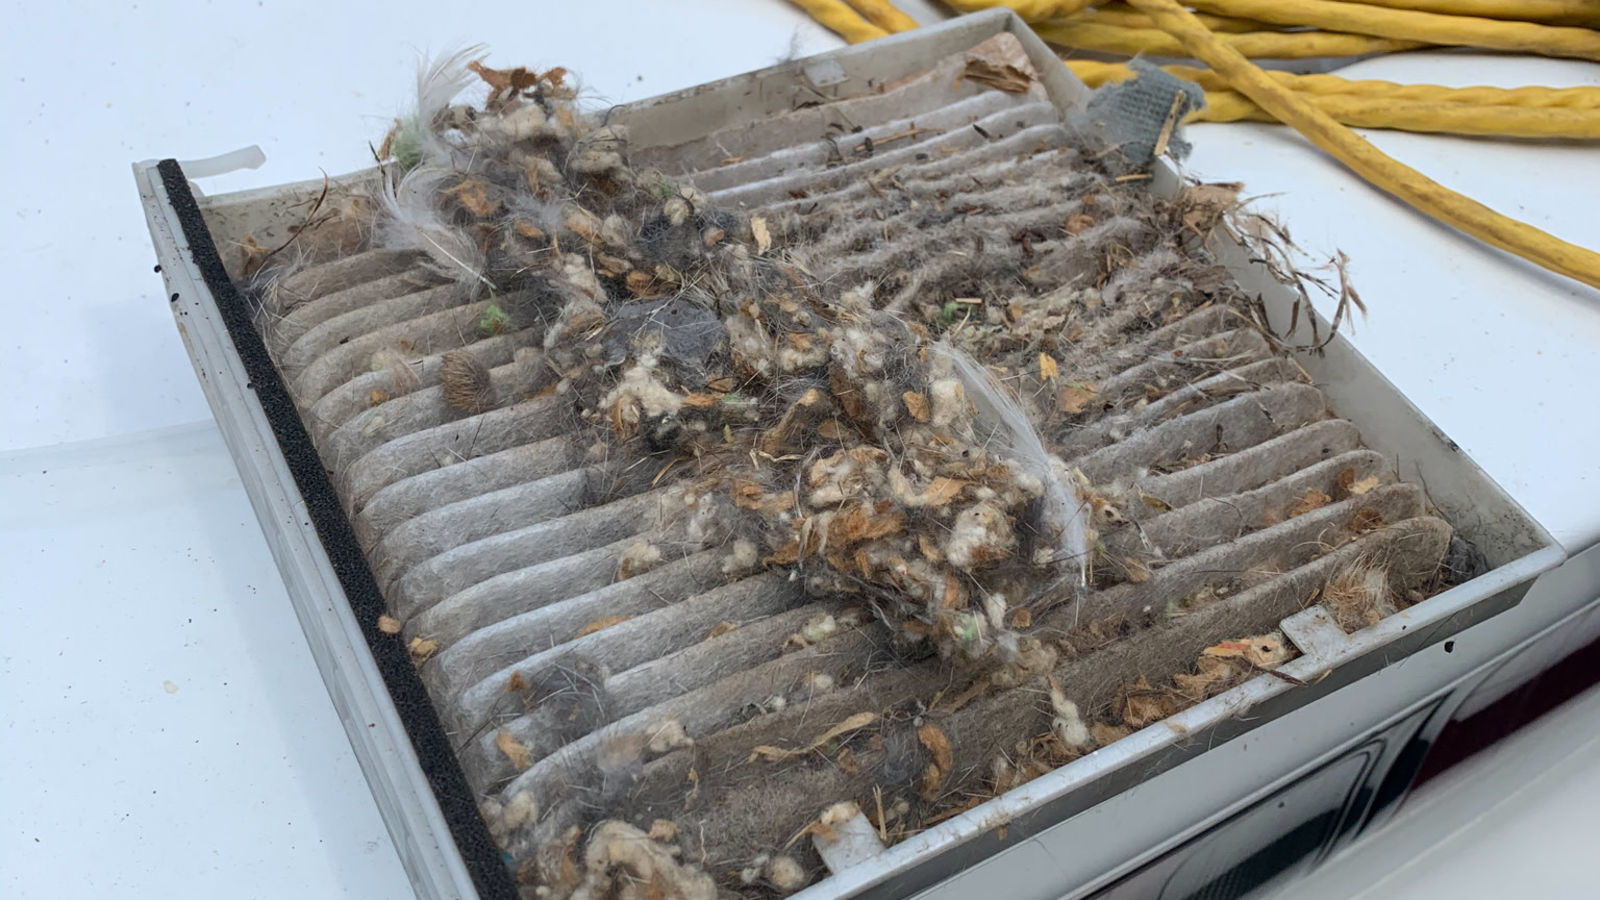 The Cabin air filter and whole blower motor had a gross mouse’s nest in it!